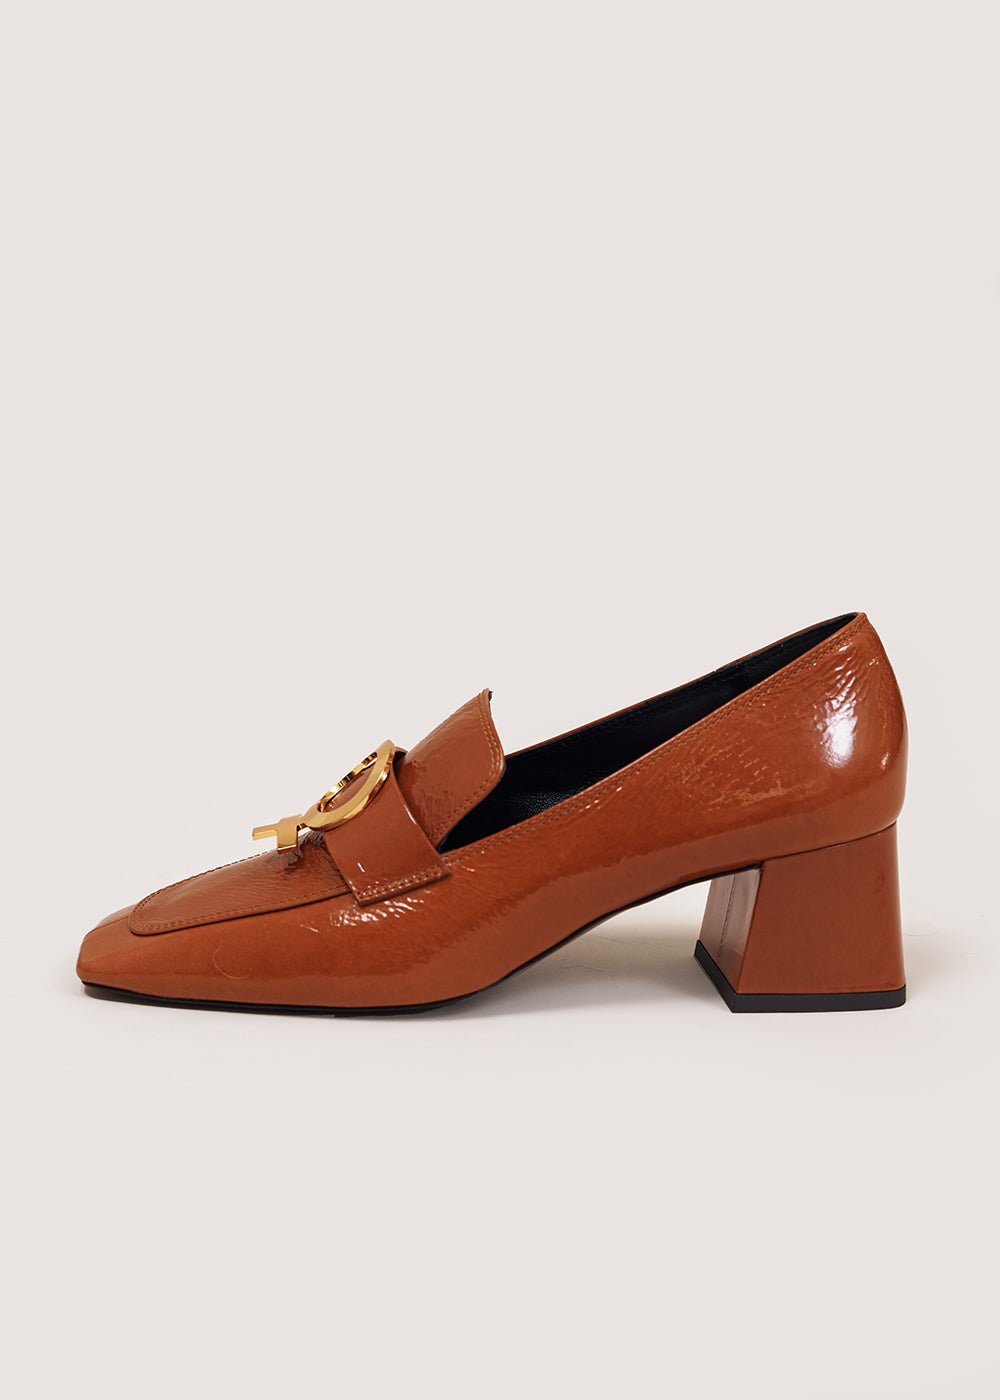 Suzanne Rae Feminist Loafer - New Classics Studios Sustainable Ethical Fashion Canada